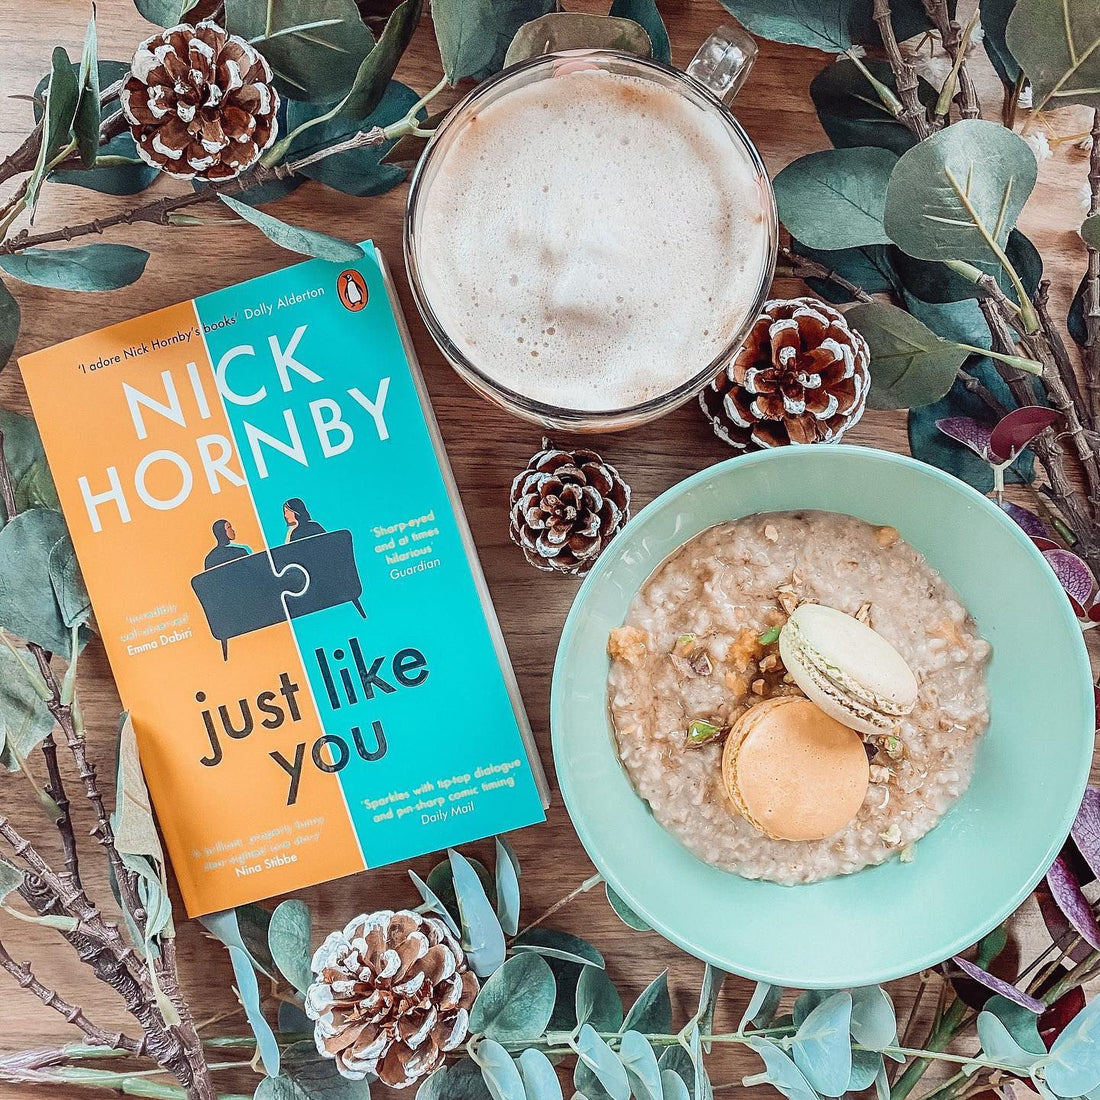 Book Review: Just Like You - Nick Hornby